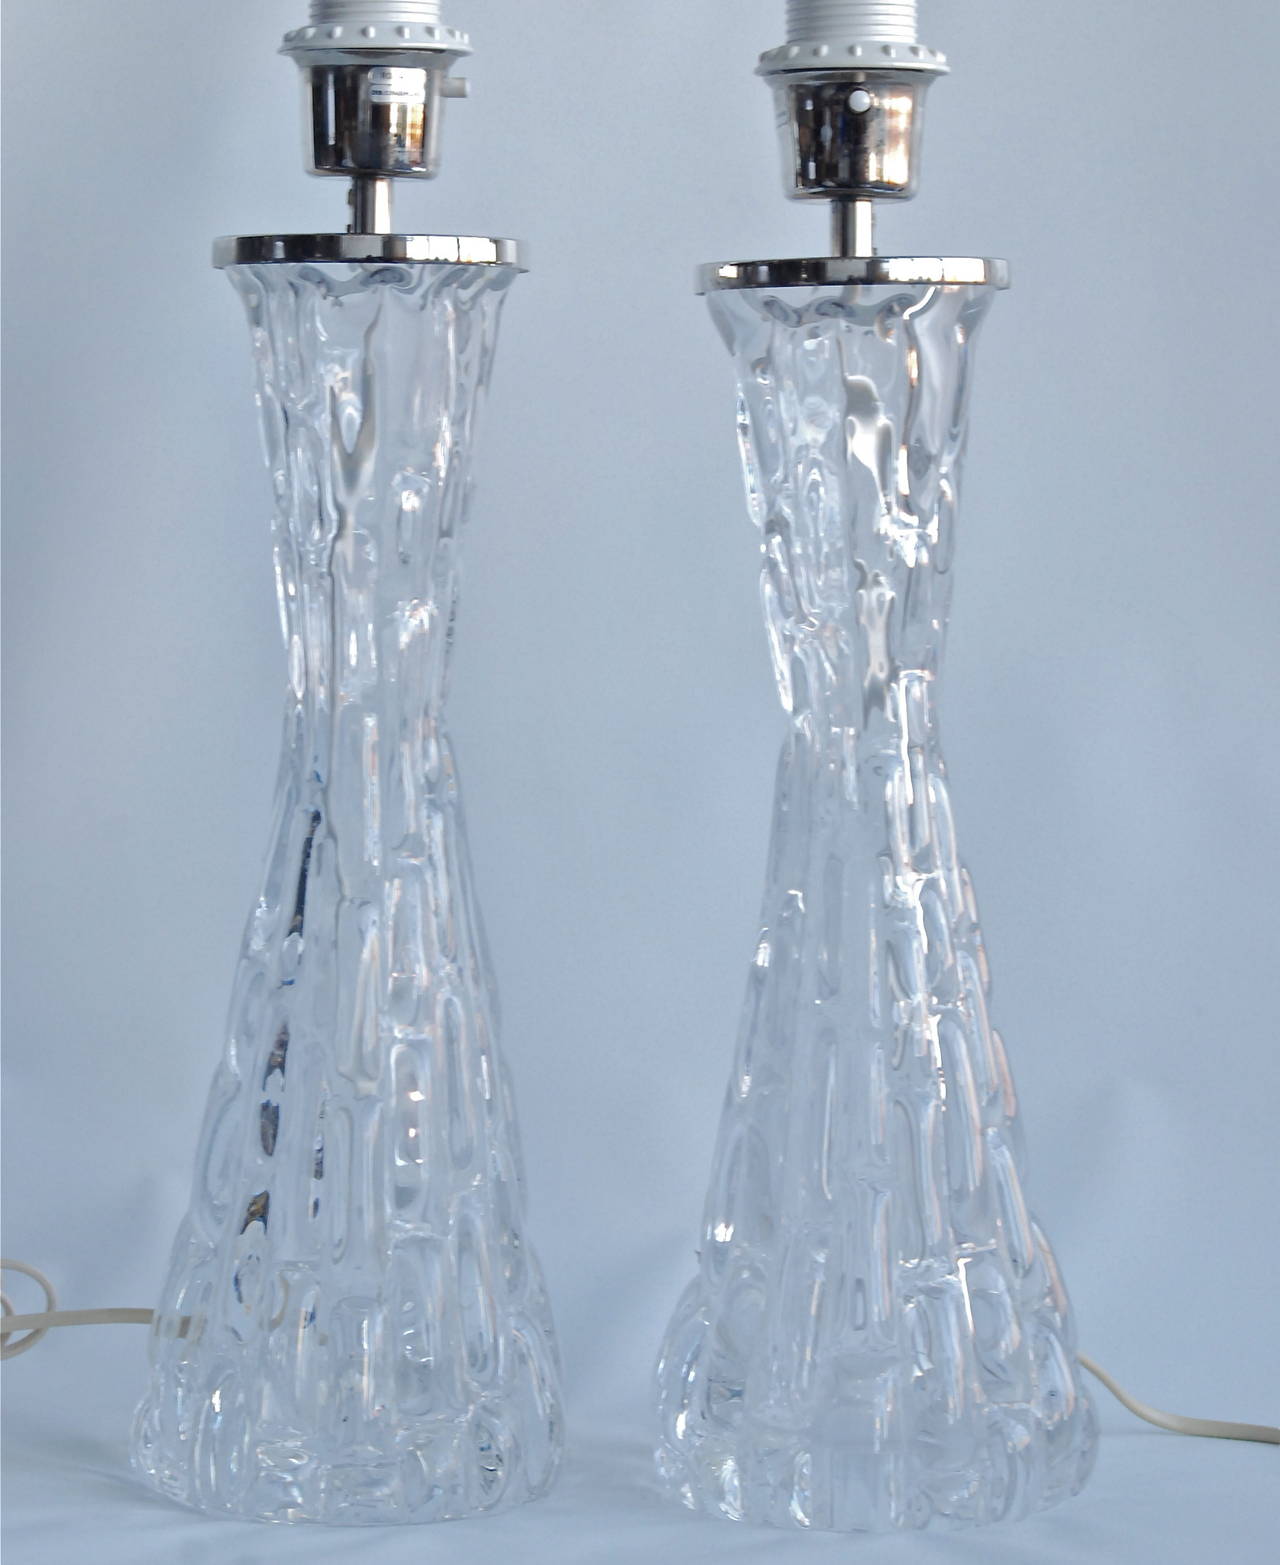 A pair of large table lamps designed by Carl Fagerlund for Orrefors, Sweden, circa 1960.
Model RD 1477, marked by manufacturer.
Glass base height 15